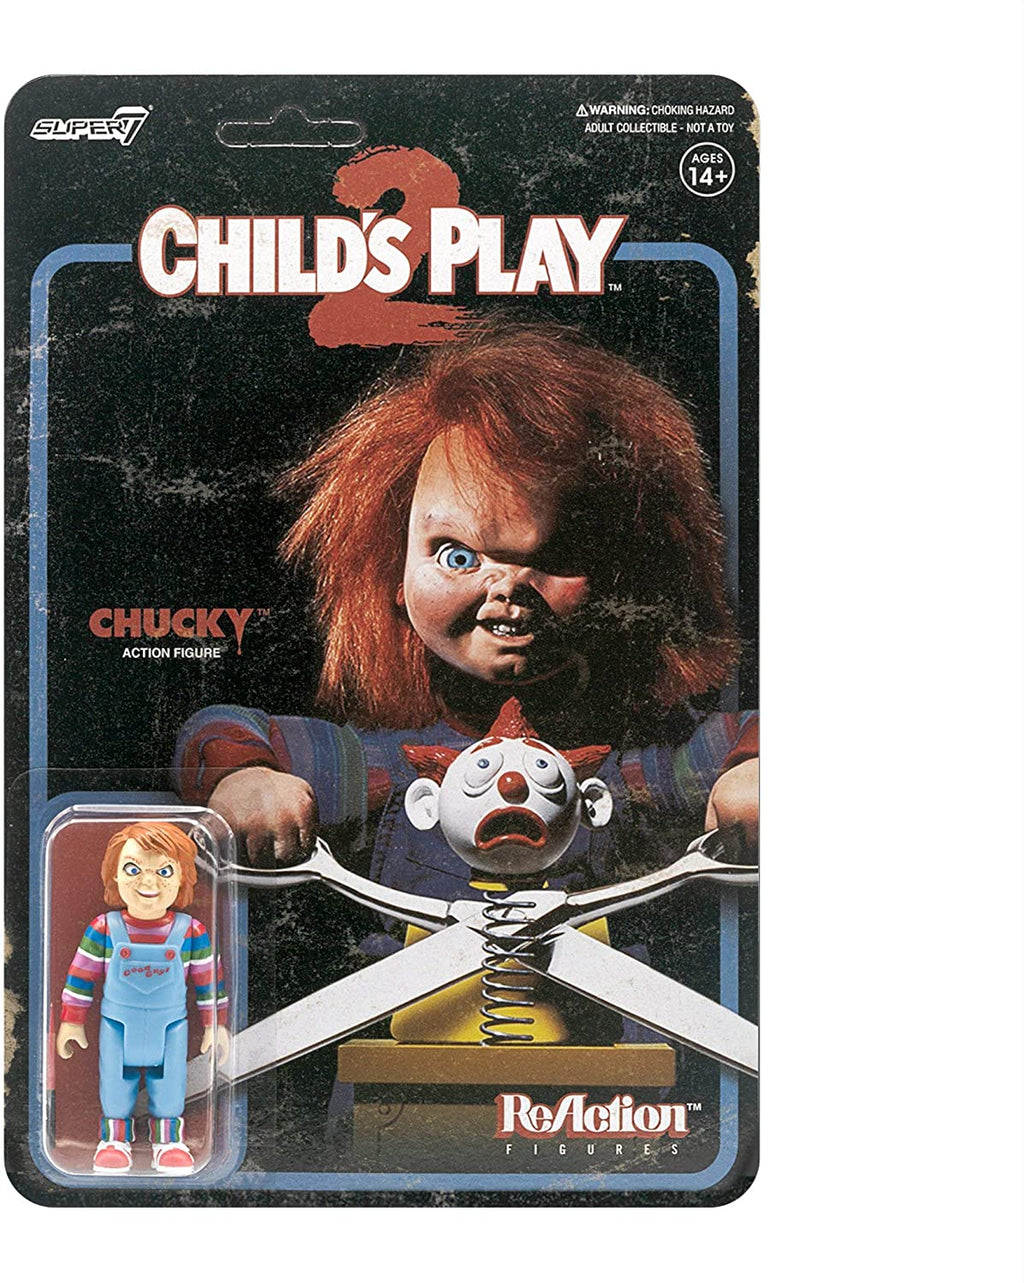 Child's Play 2 - Evil Chucky  3 3/4" Reaction Figure by Super 7